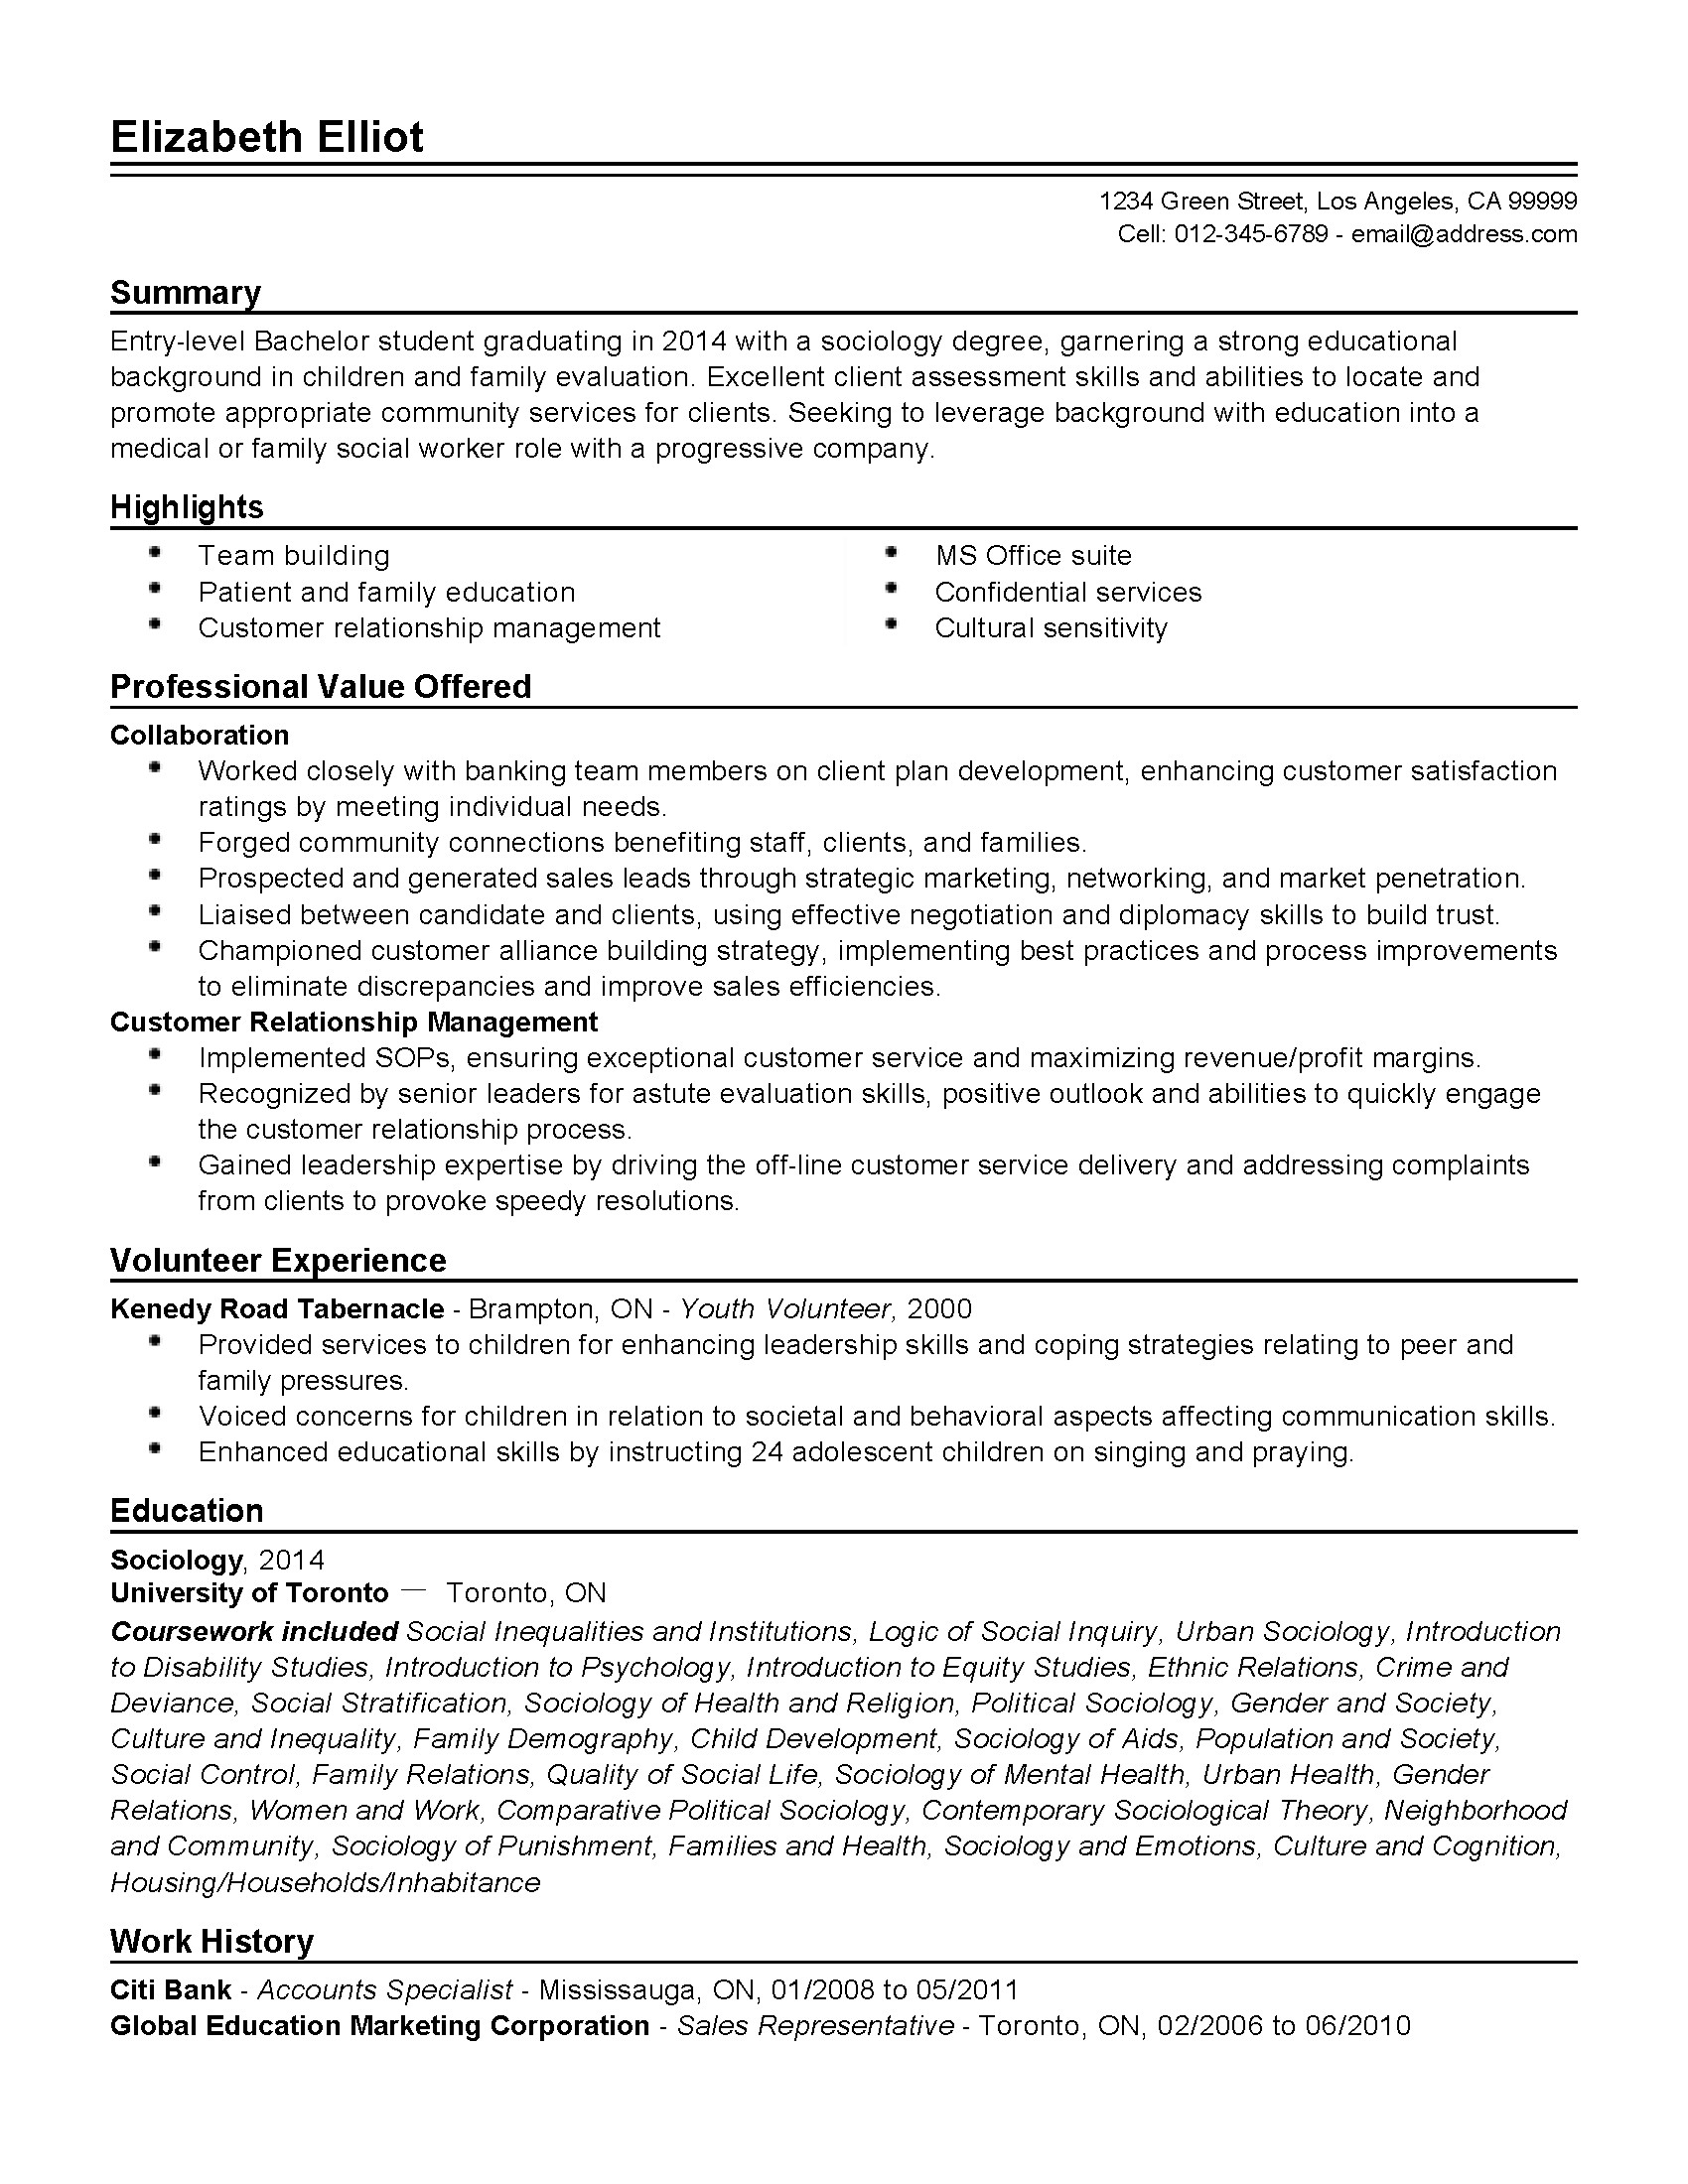 Social Worker Resume Templates Professional Entry Level social Worker Templates to